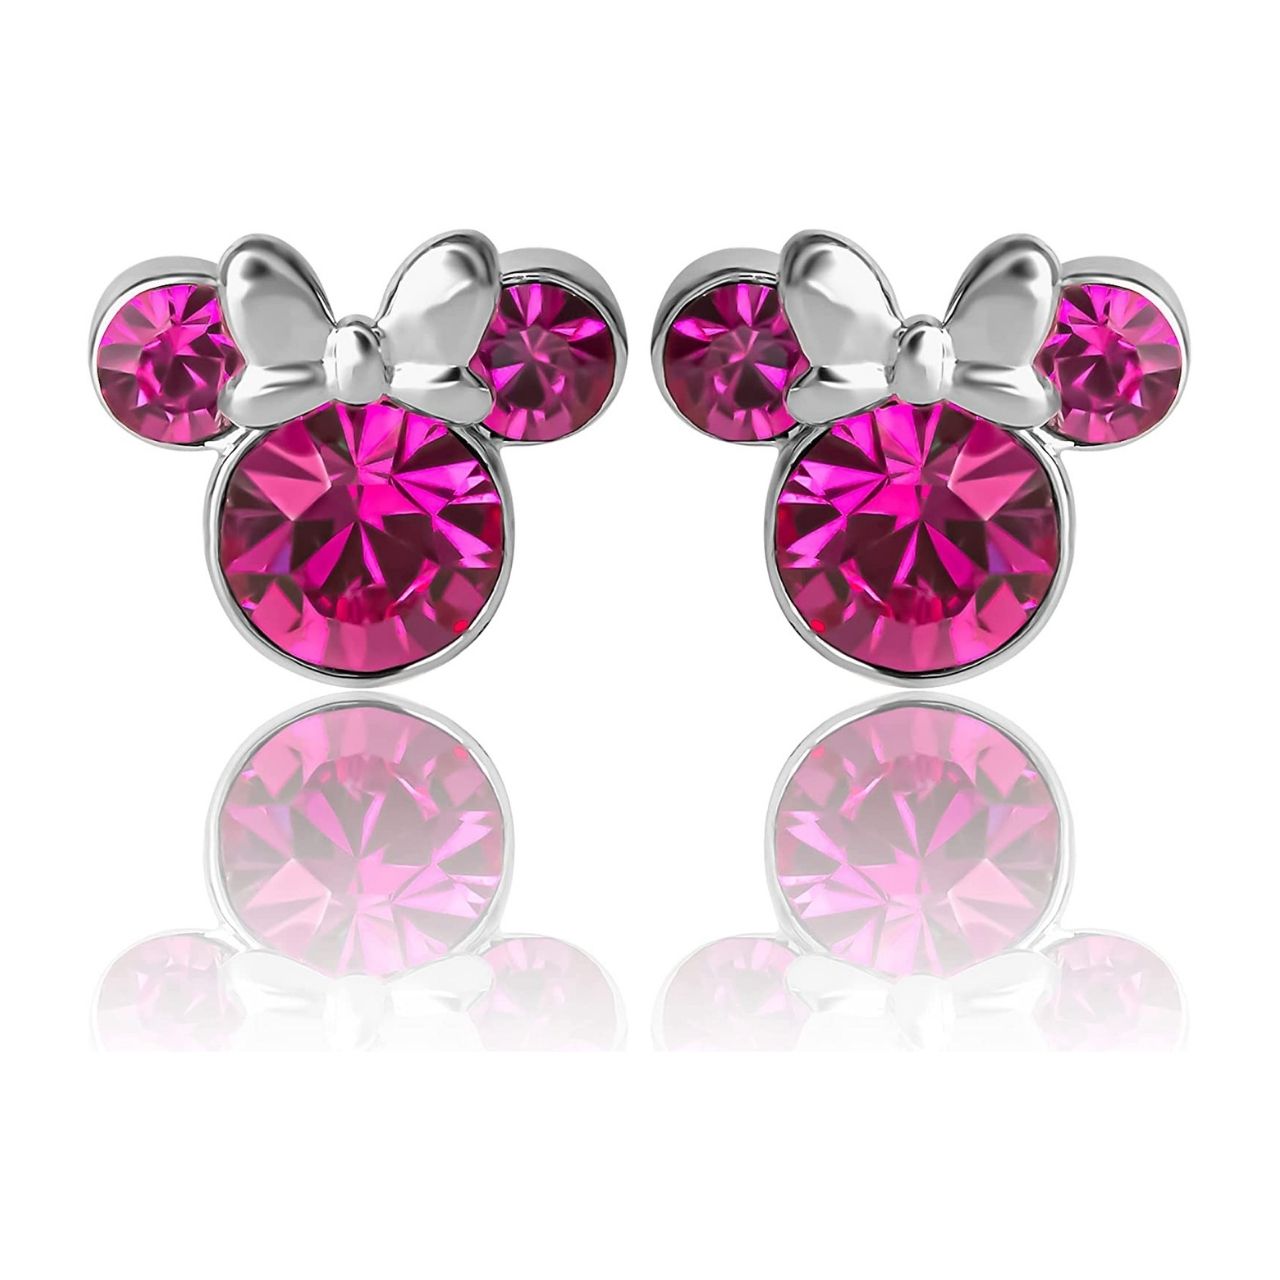 Disney Minnie Mouse Sterling Silver Birthstone Earrings Pink Rose  Pink Rose October Birthstone  Stunning silver Birthstone earrings form a silhouette of Minnie Mouse with pink rose CZ Crystals adding a feminine touch to the Disney classic piece of Jewellery.  Trendy and fashionable design, the Disney Minnie Mouse silhouette sterling silver earrings add a chic, fun touch to any outfit.